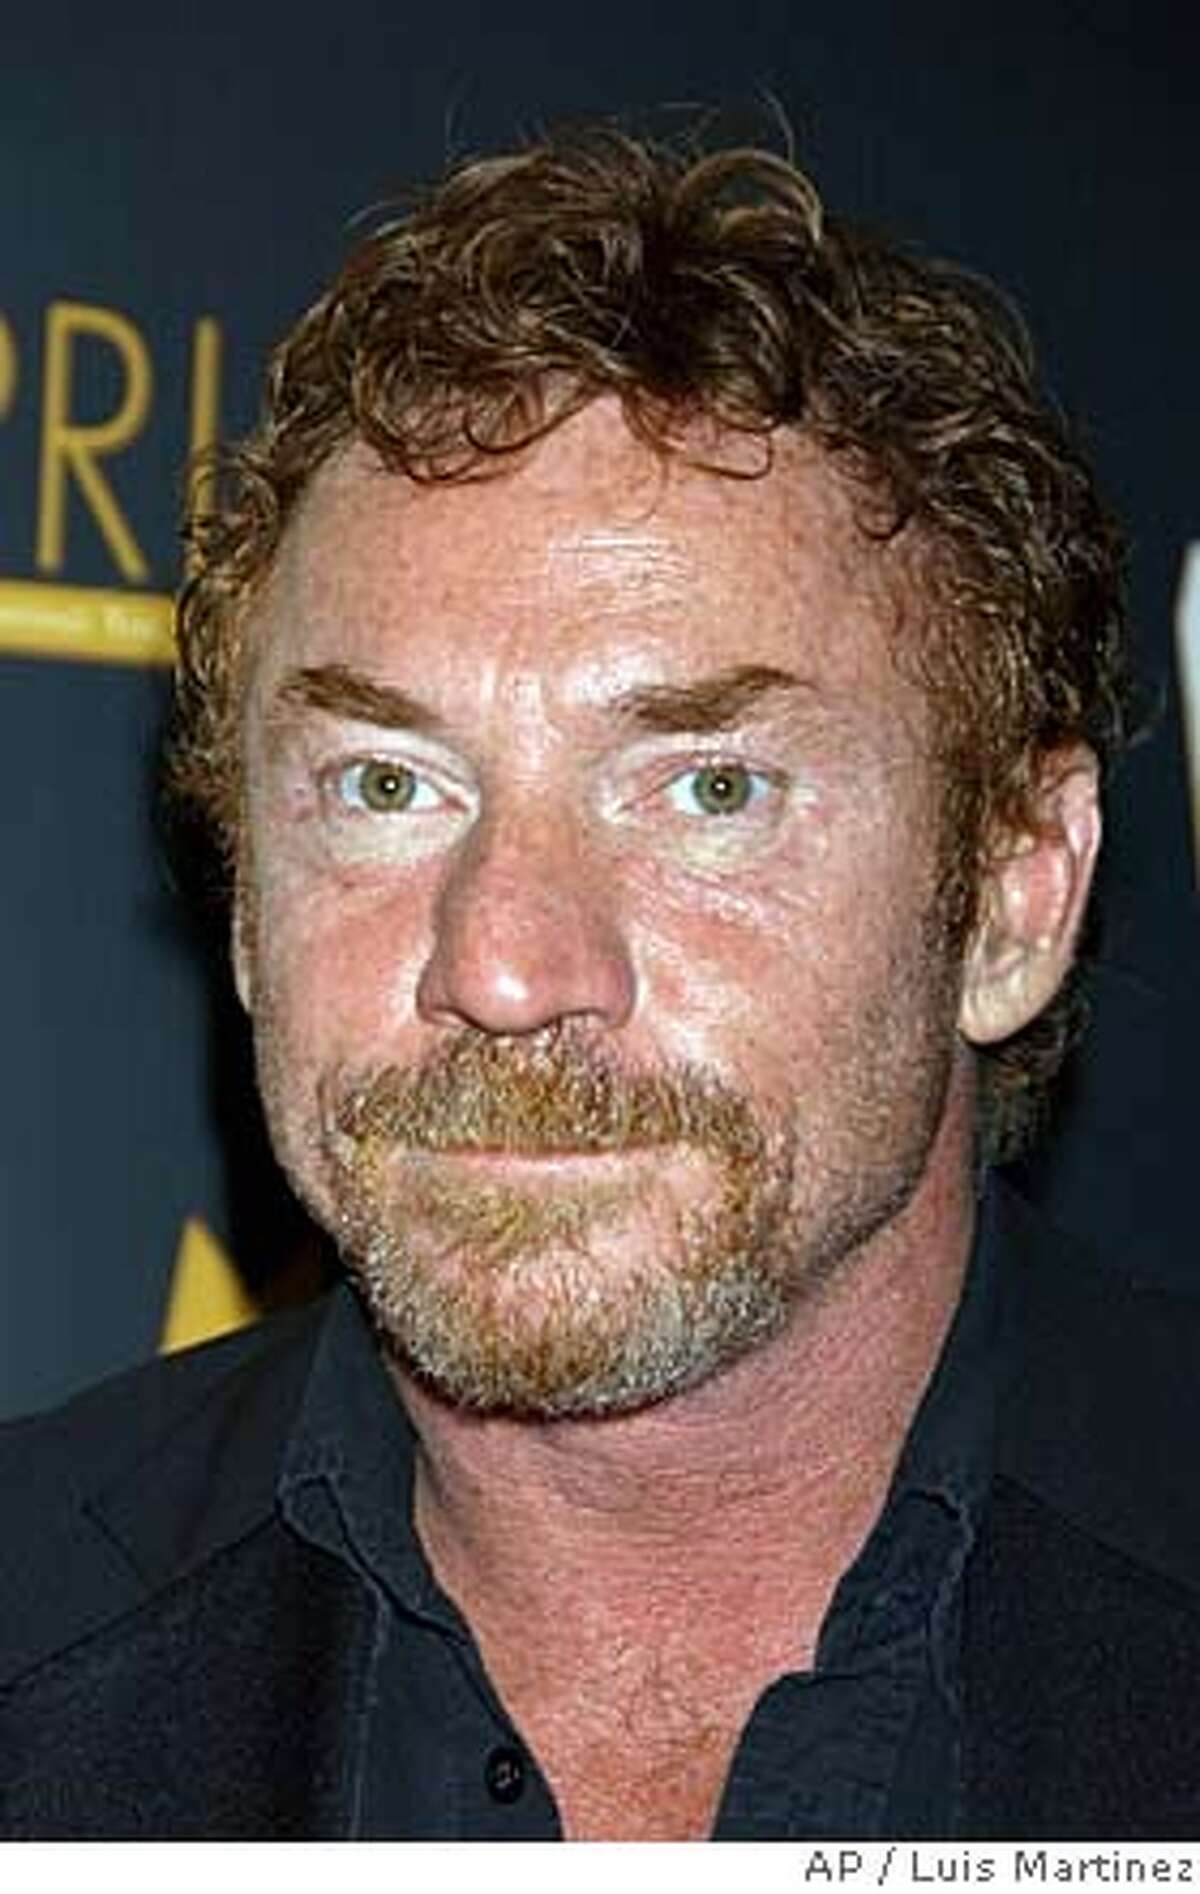 ** FILE ** Danny Bonaduce arrives at the 10th Annual PRISM Awards held at the Beverly Hills Hotel in this April 27, 2006 file photo in Beverly Hills, Calif. Former "Survivor" contestant Jonny Fairplay filed a police report Wednesday, Oct. 3, 2007 alleging that radio talk show host Danny Bonaduce threw him and knocked out his teeth during an awards show. (AP Photo / Luis Martinez) APRIL 27, 2006 FILE PHOTO